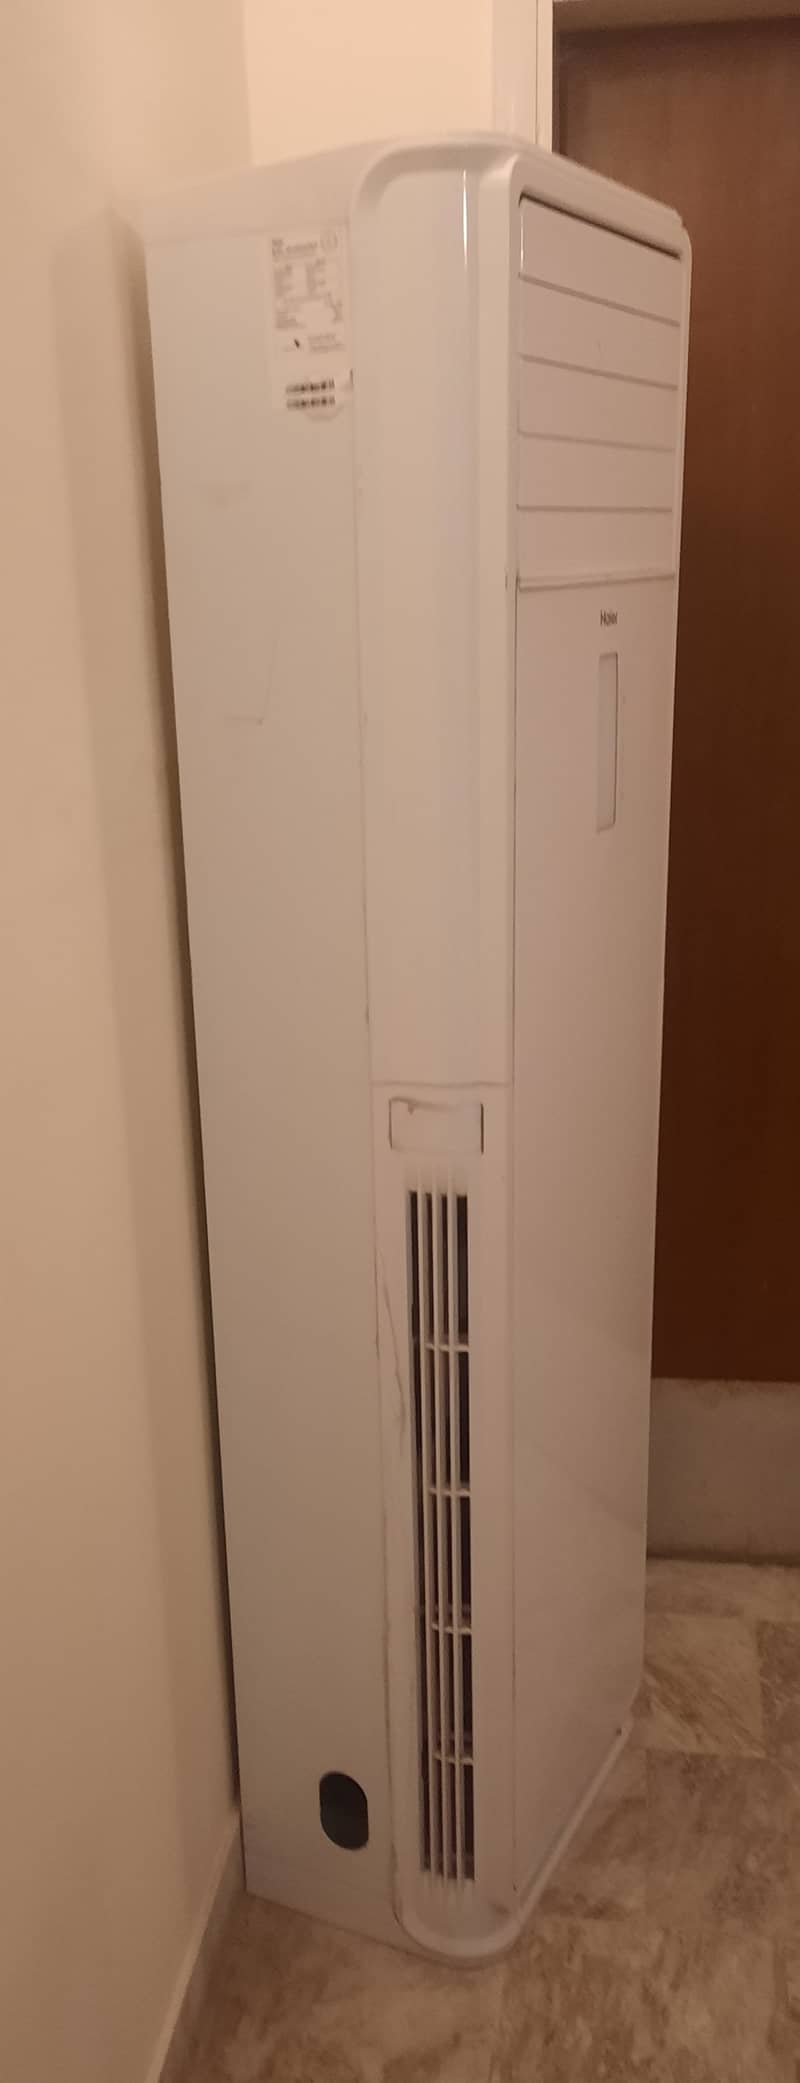 Haier Air Conditioner Standing ac 1